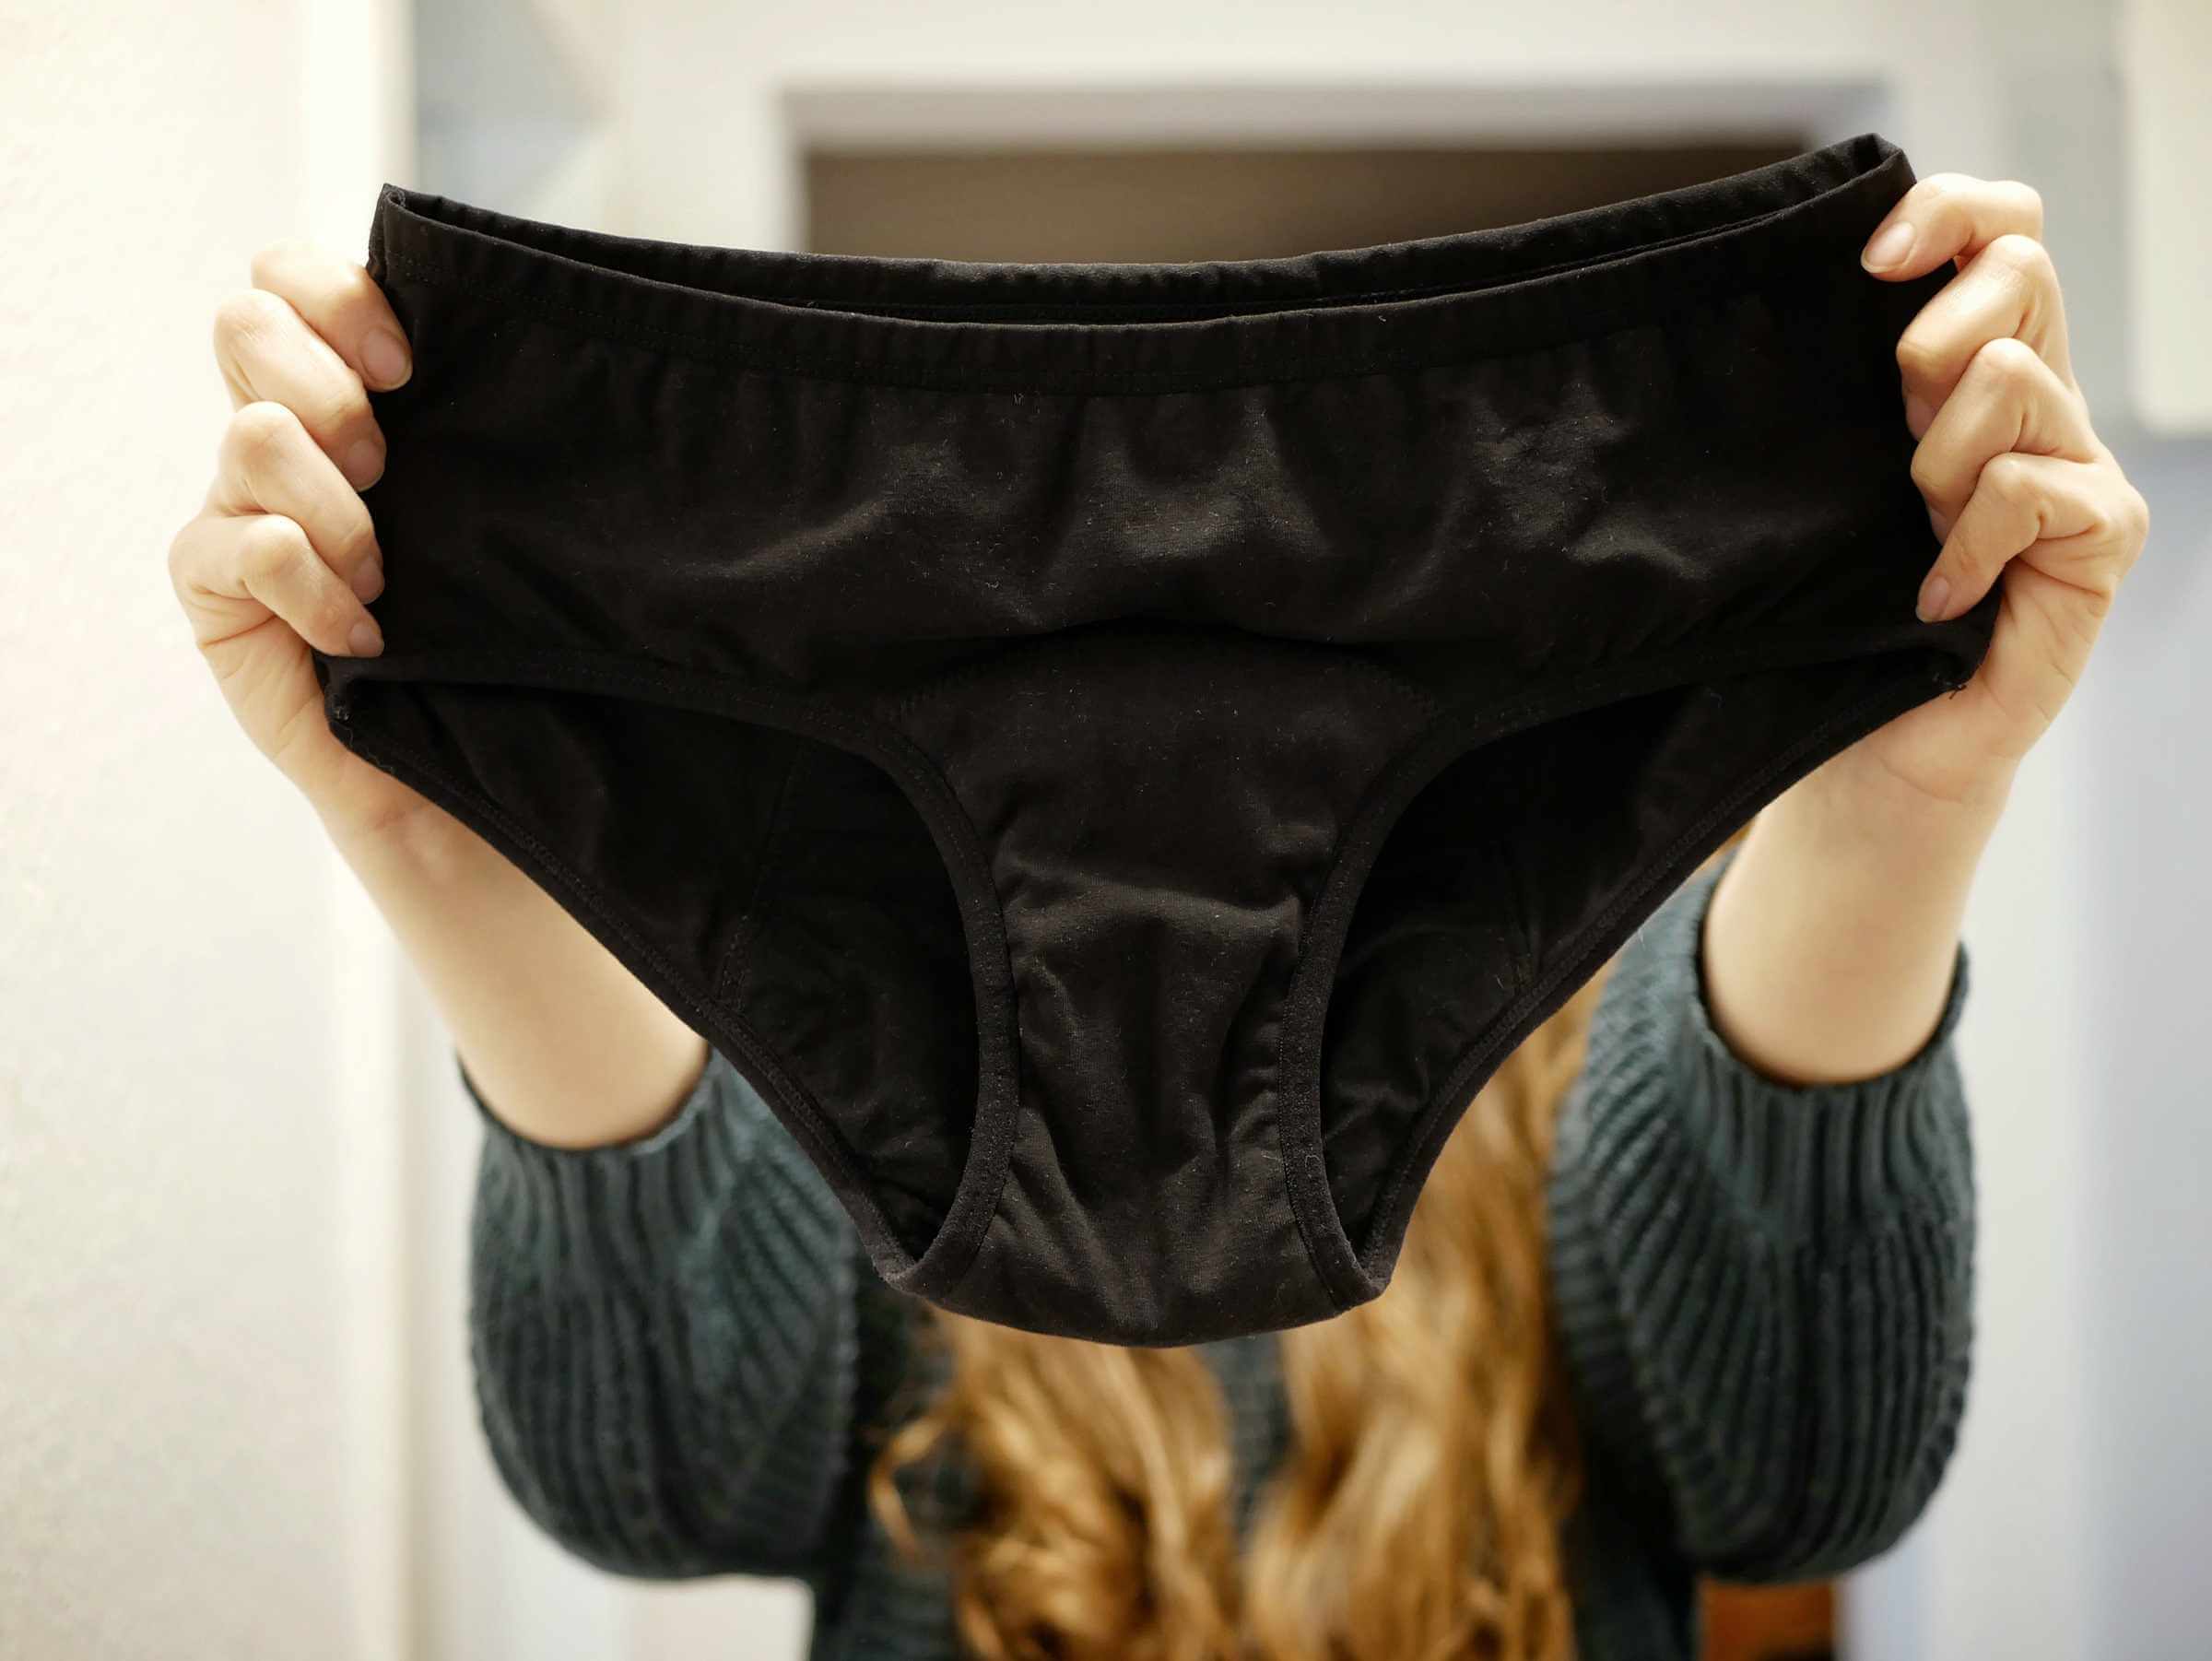 Should You Wash New Underwear Before Wearing?